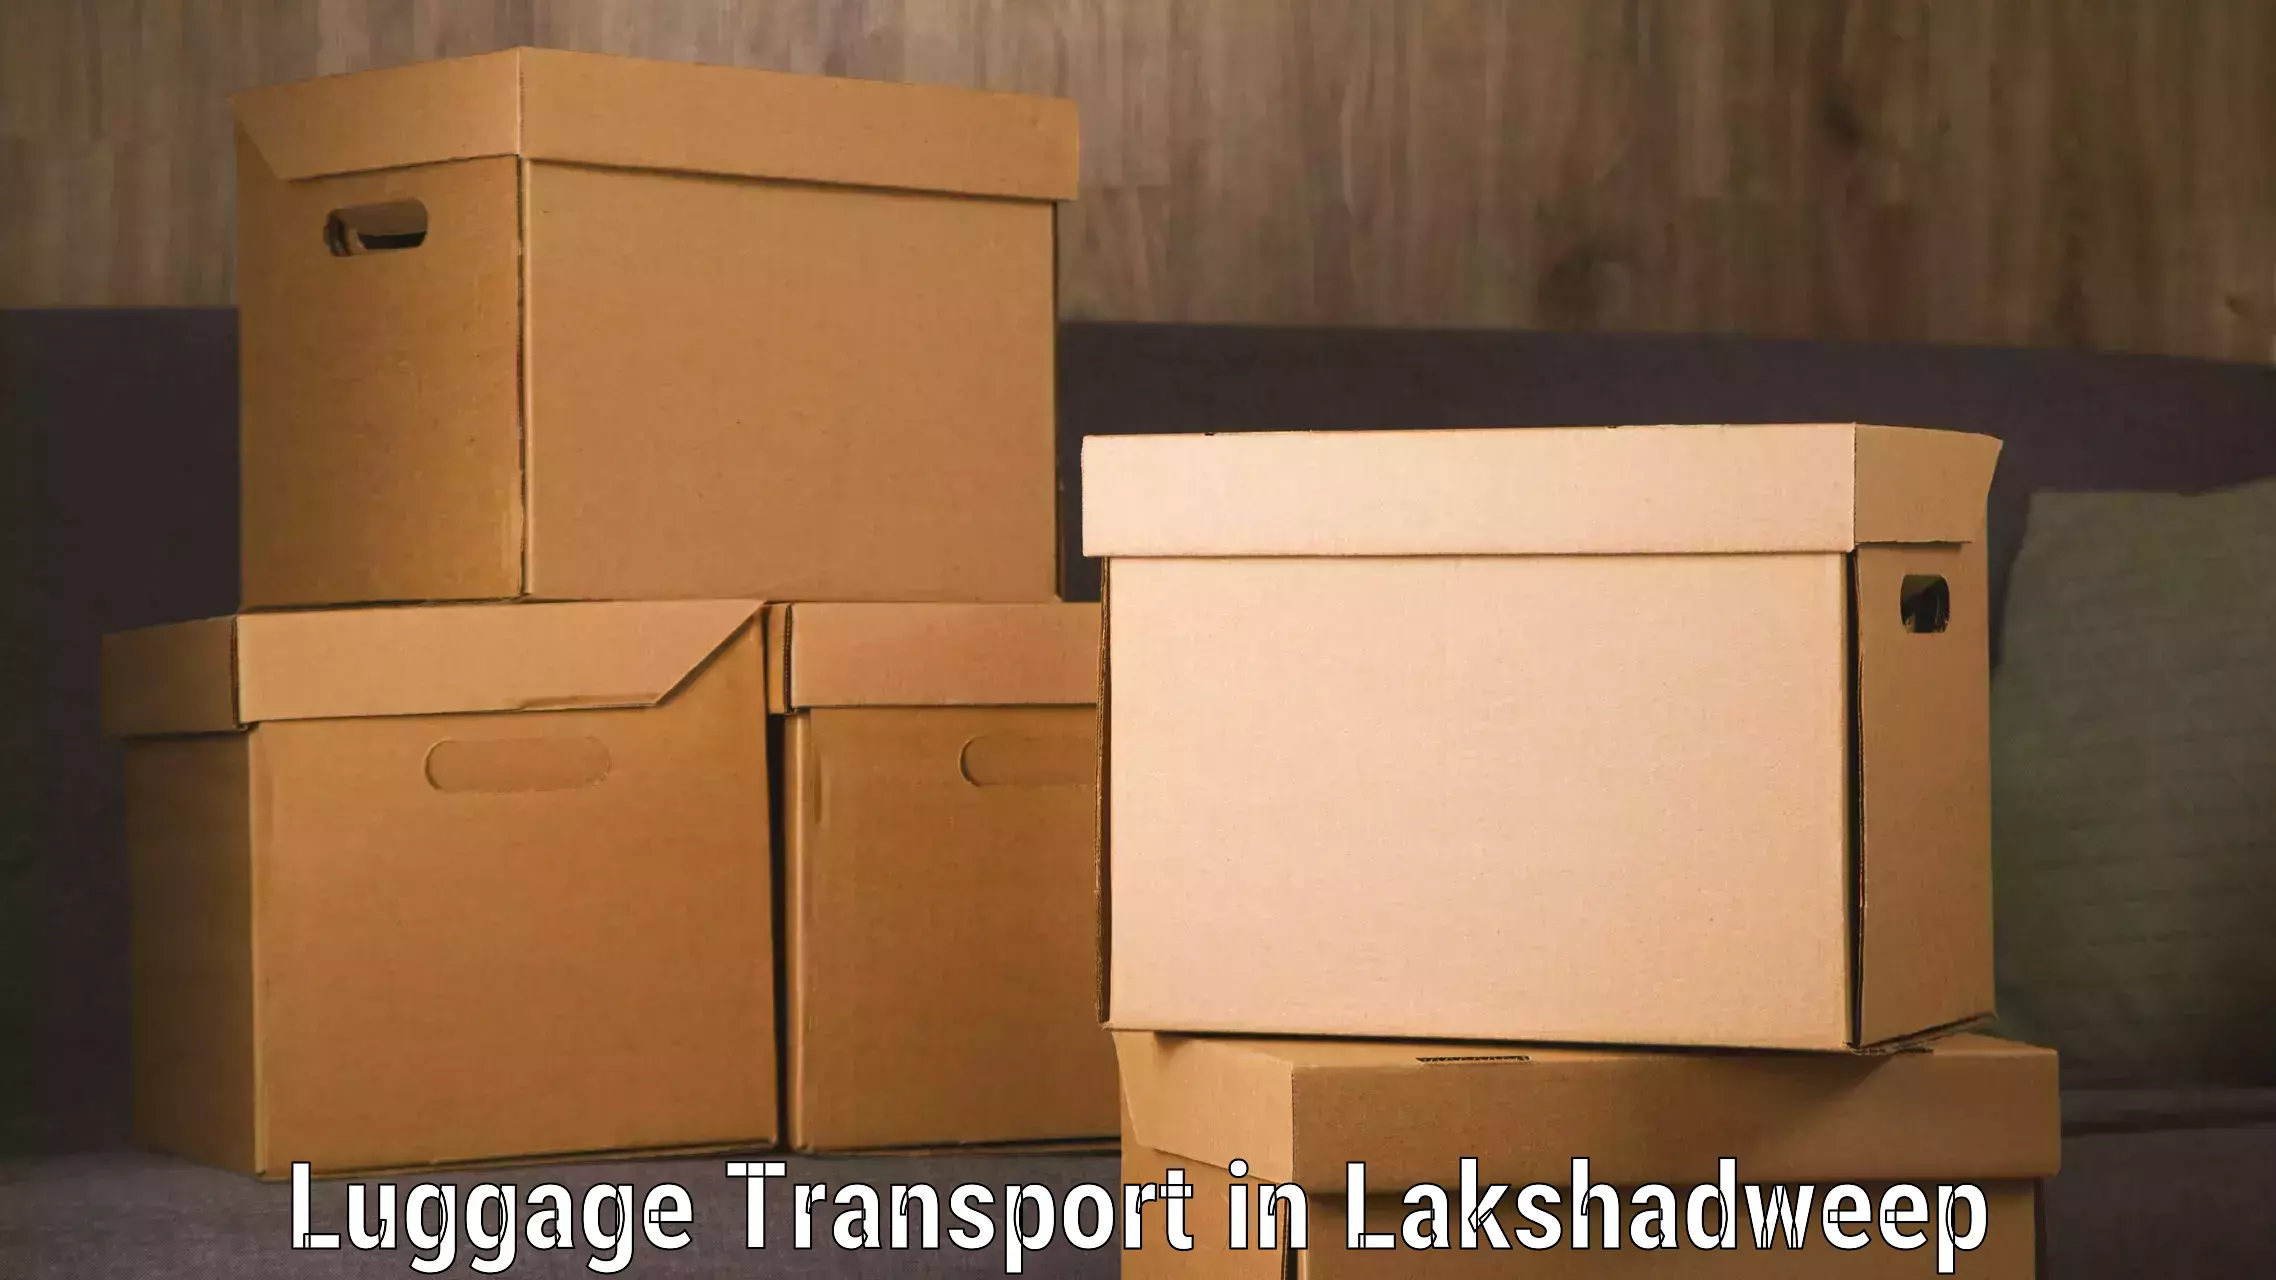 Business luggage transport in Lakshadweep